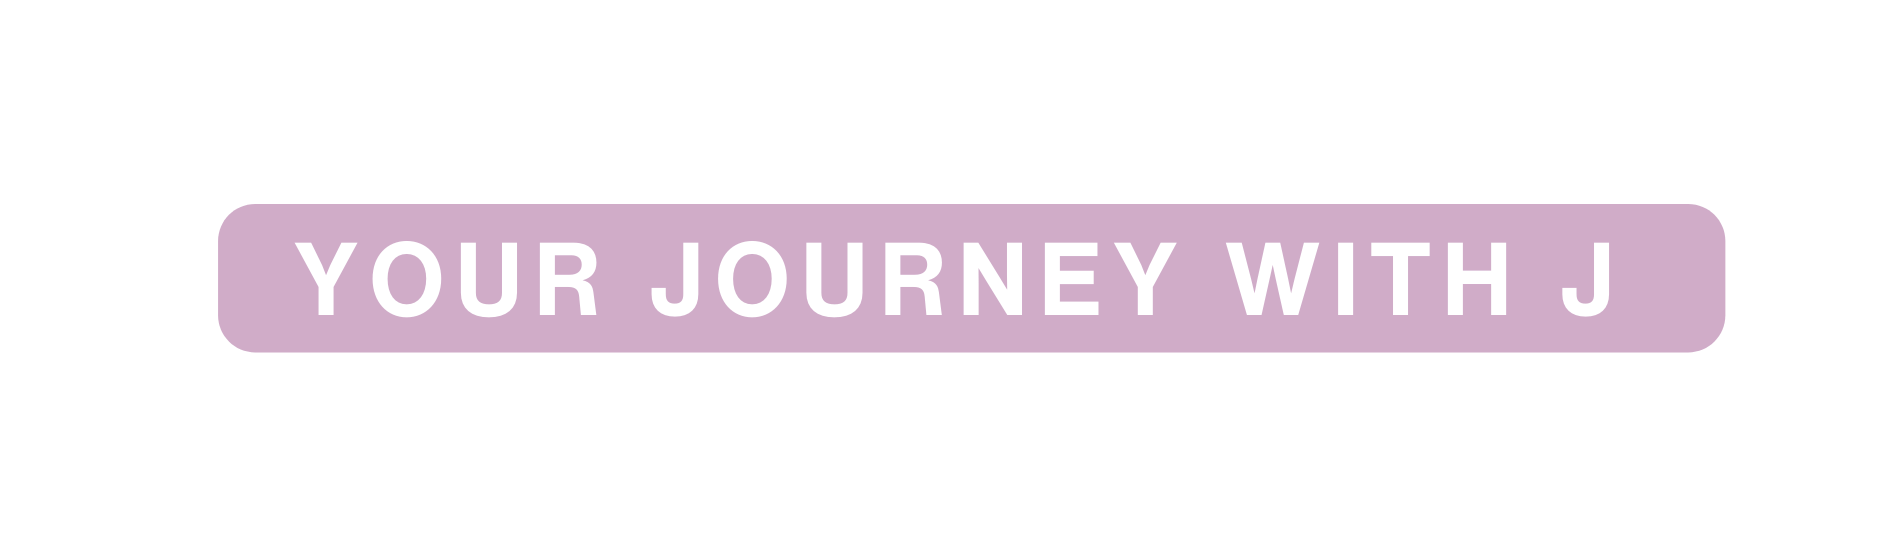 Your Journey with J